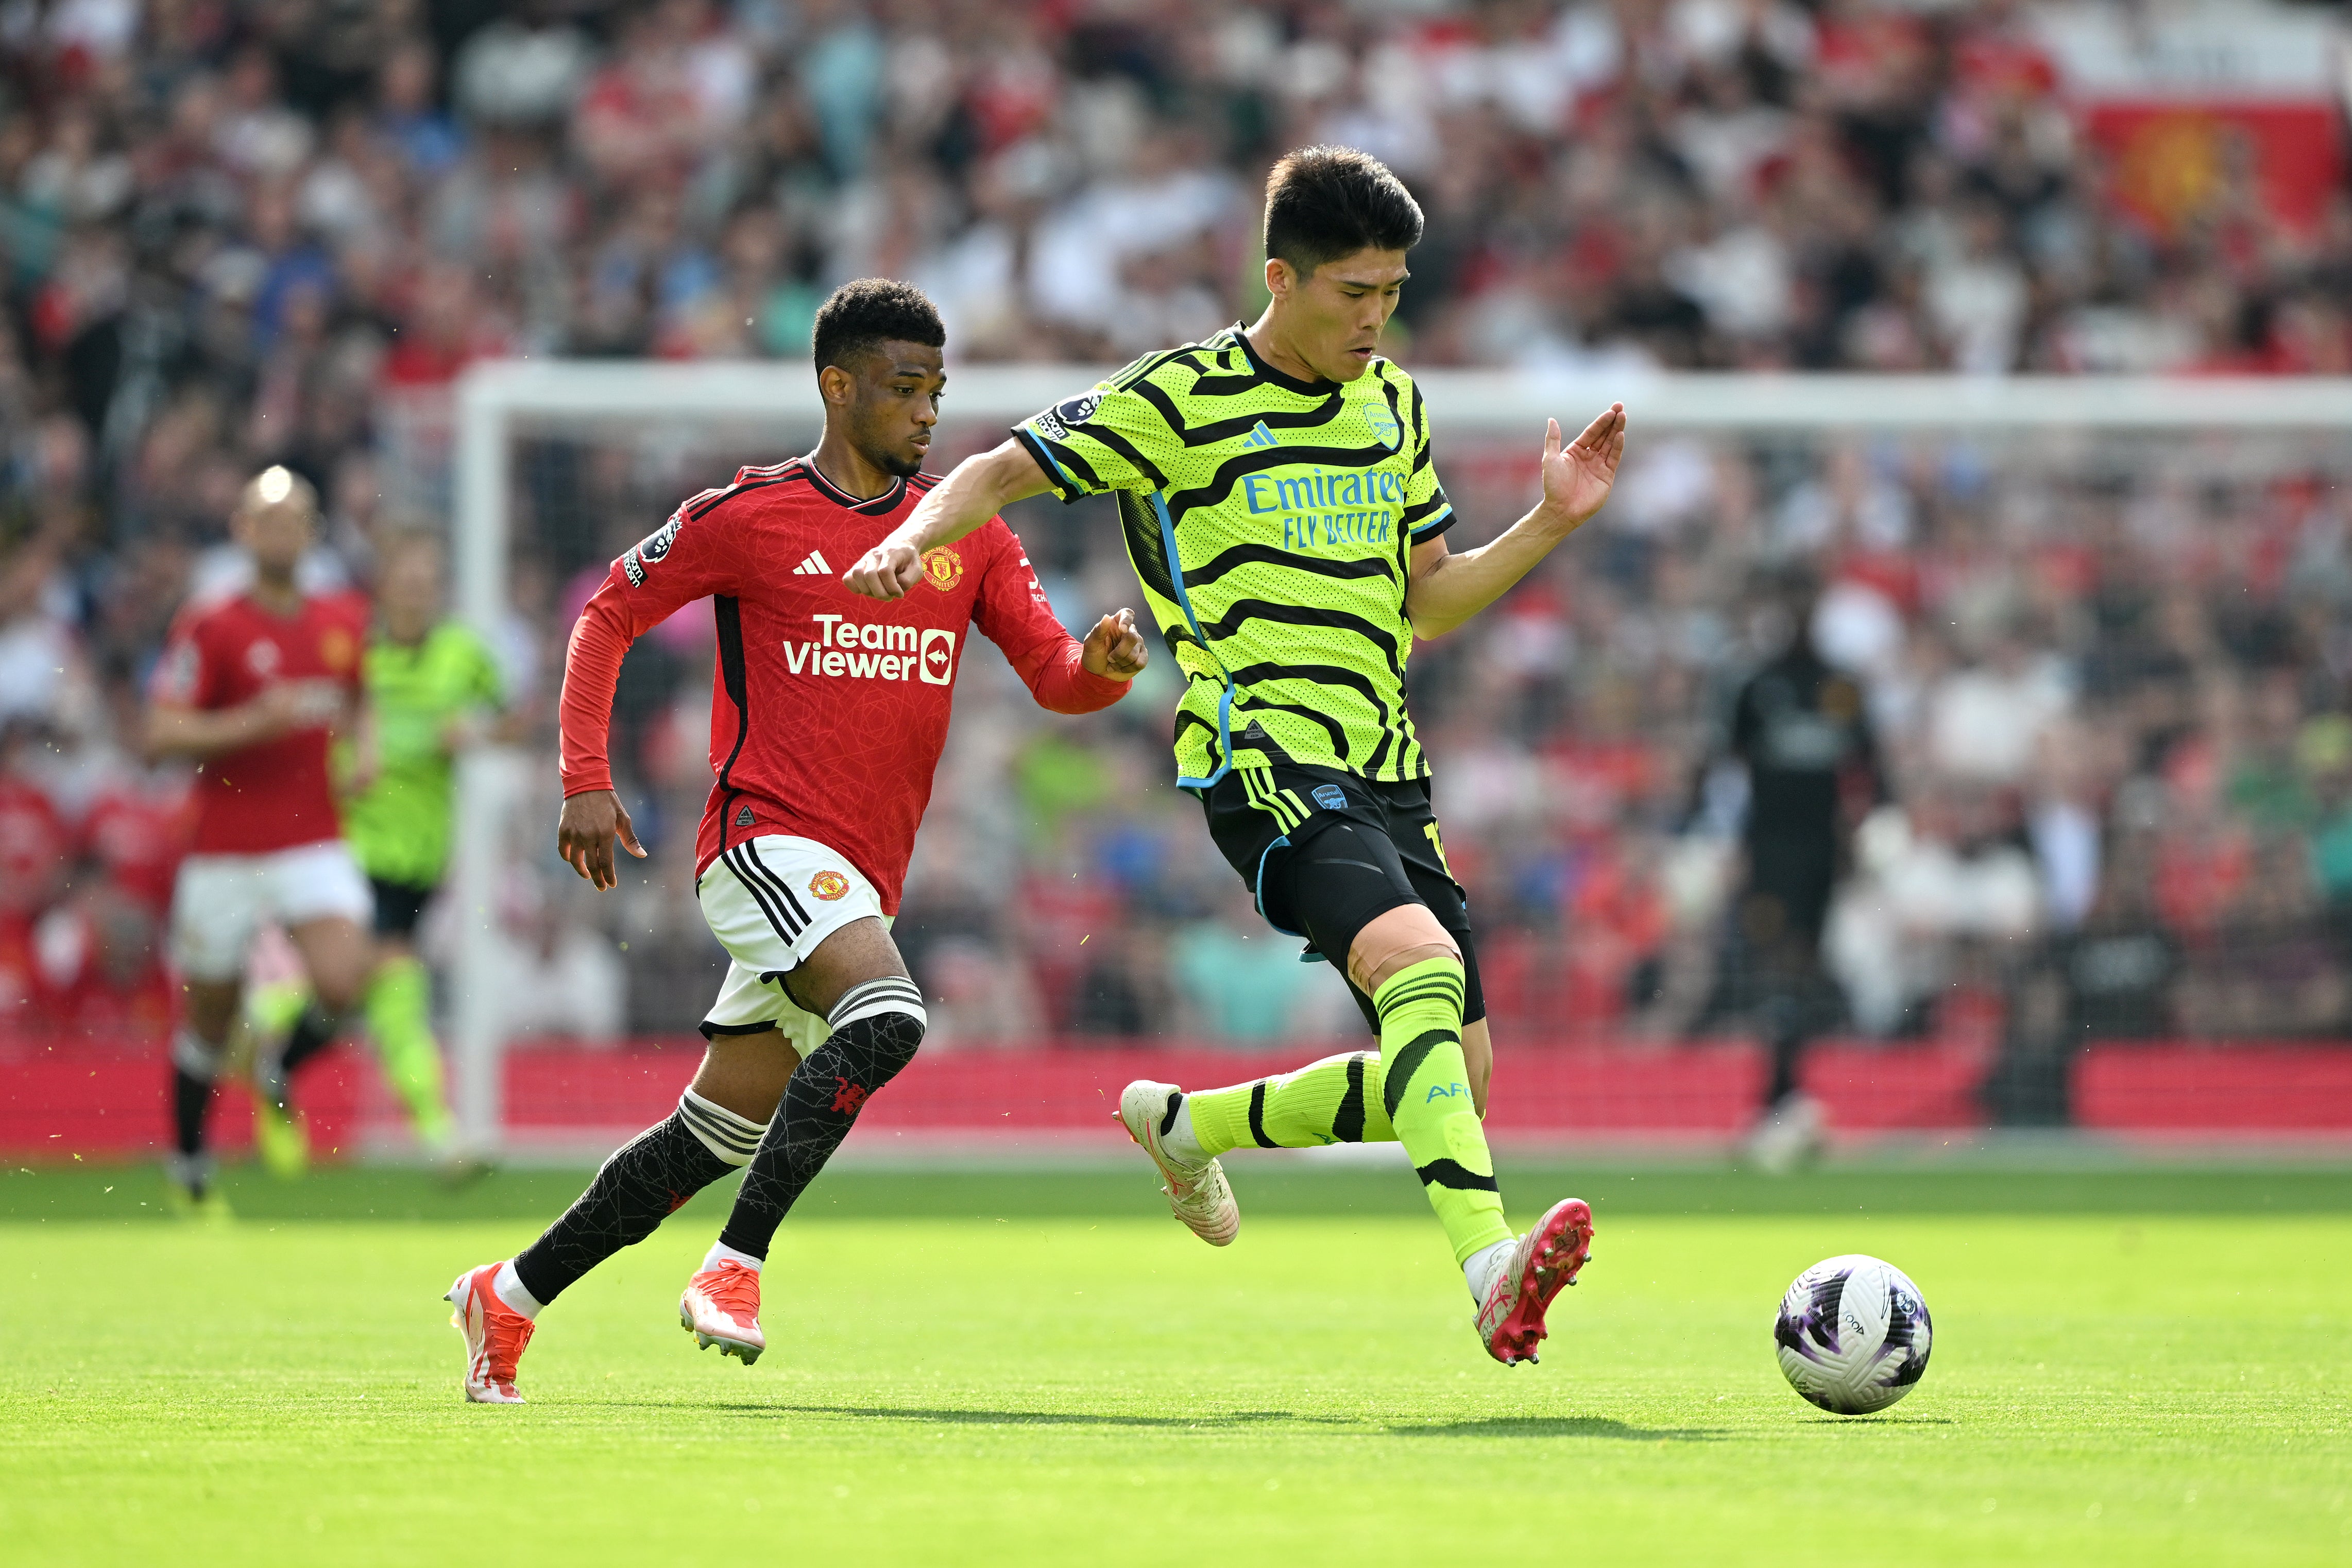 Tomiyasu and Diallo enjoyed a good duel down United’s right side